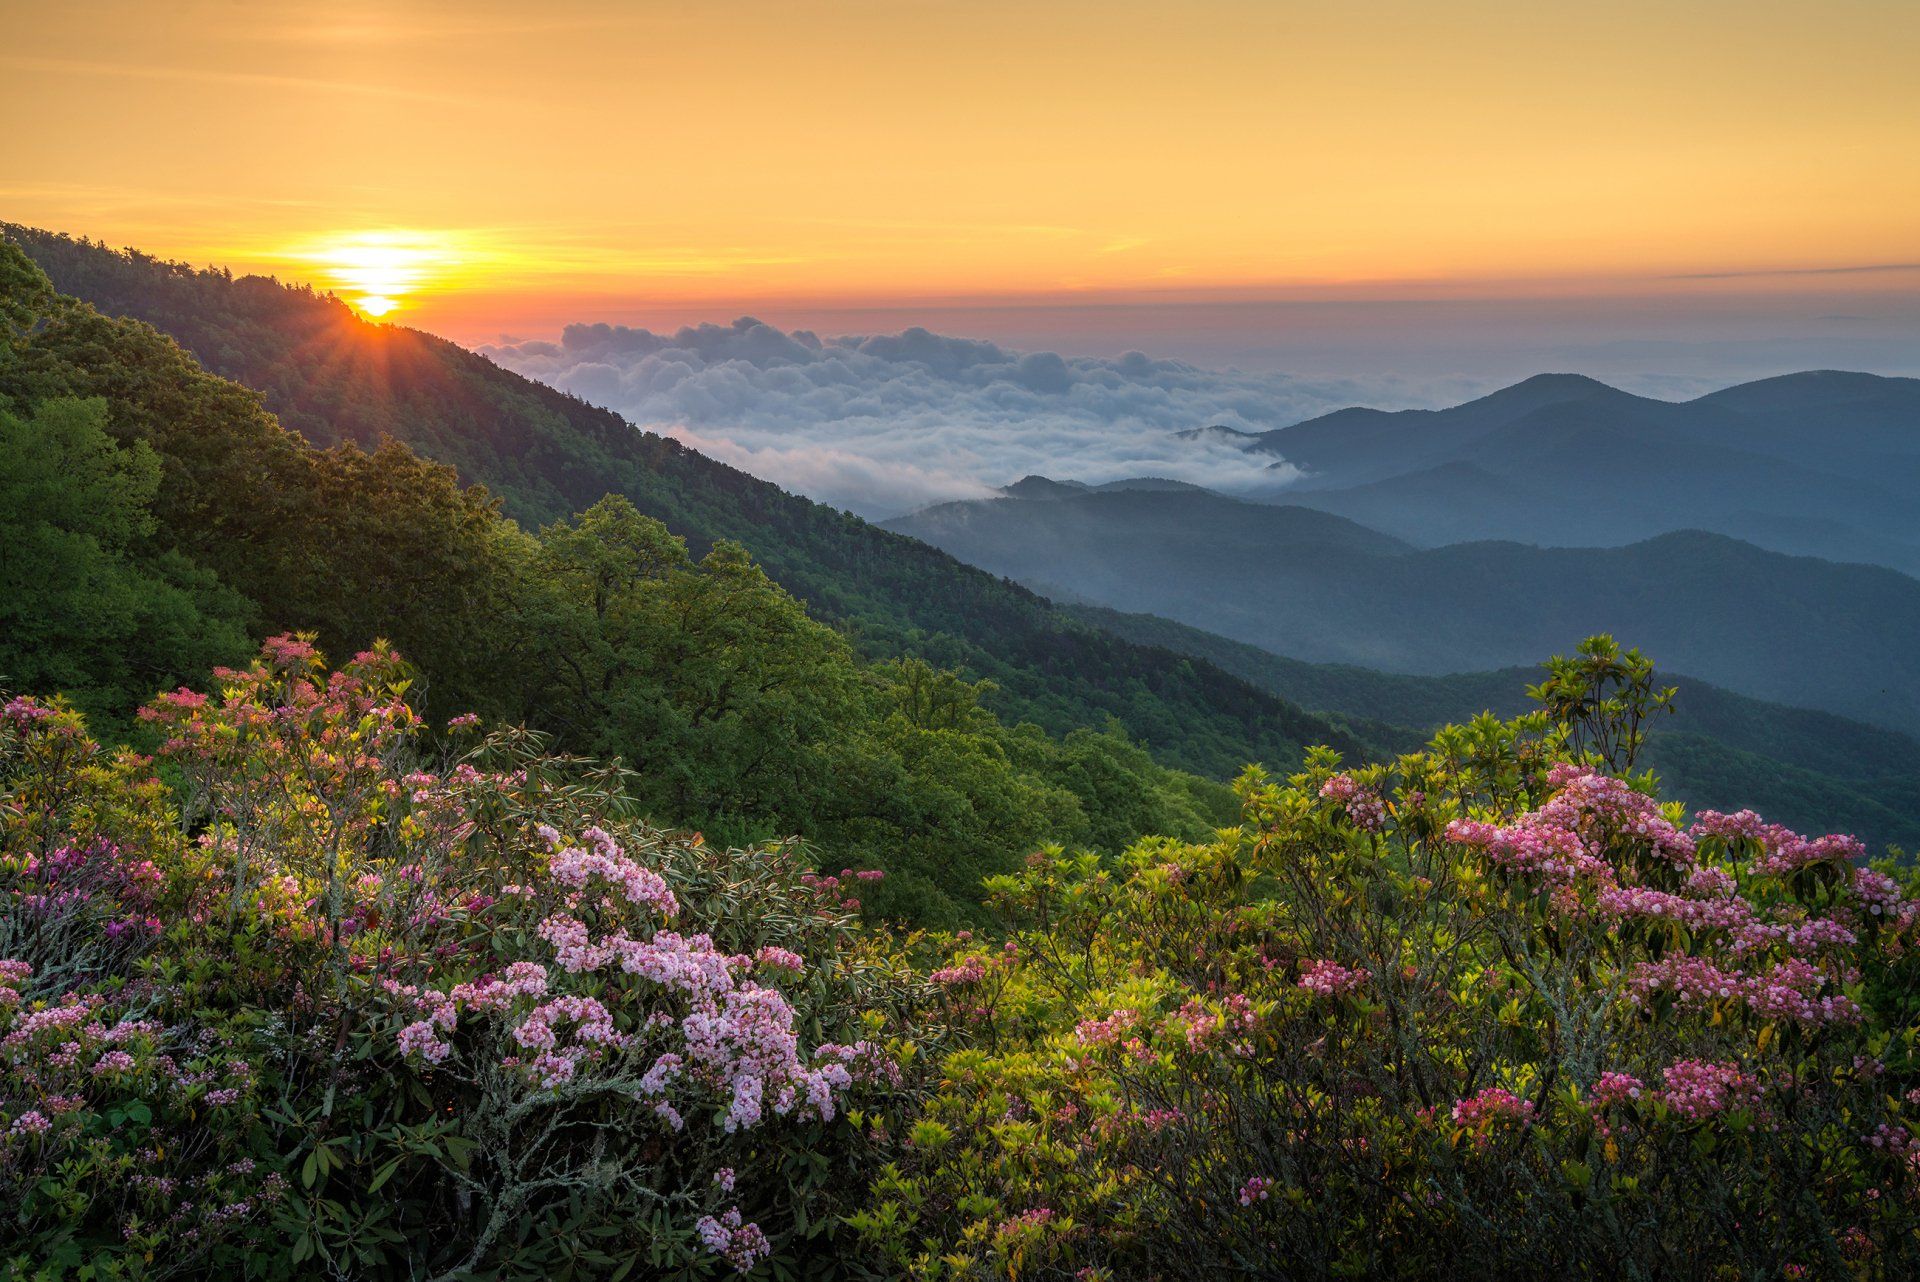 the sun is setting over the mountains with flowers in the foreground .